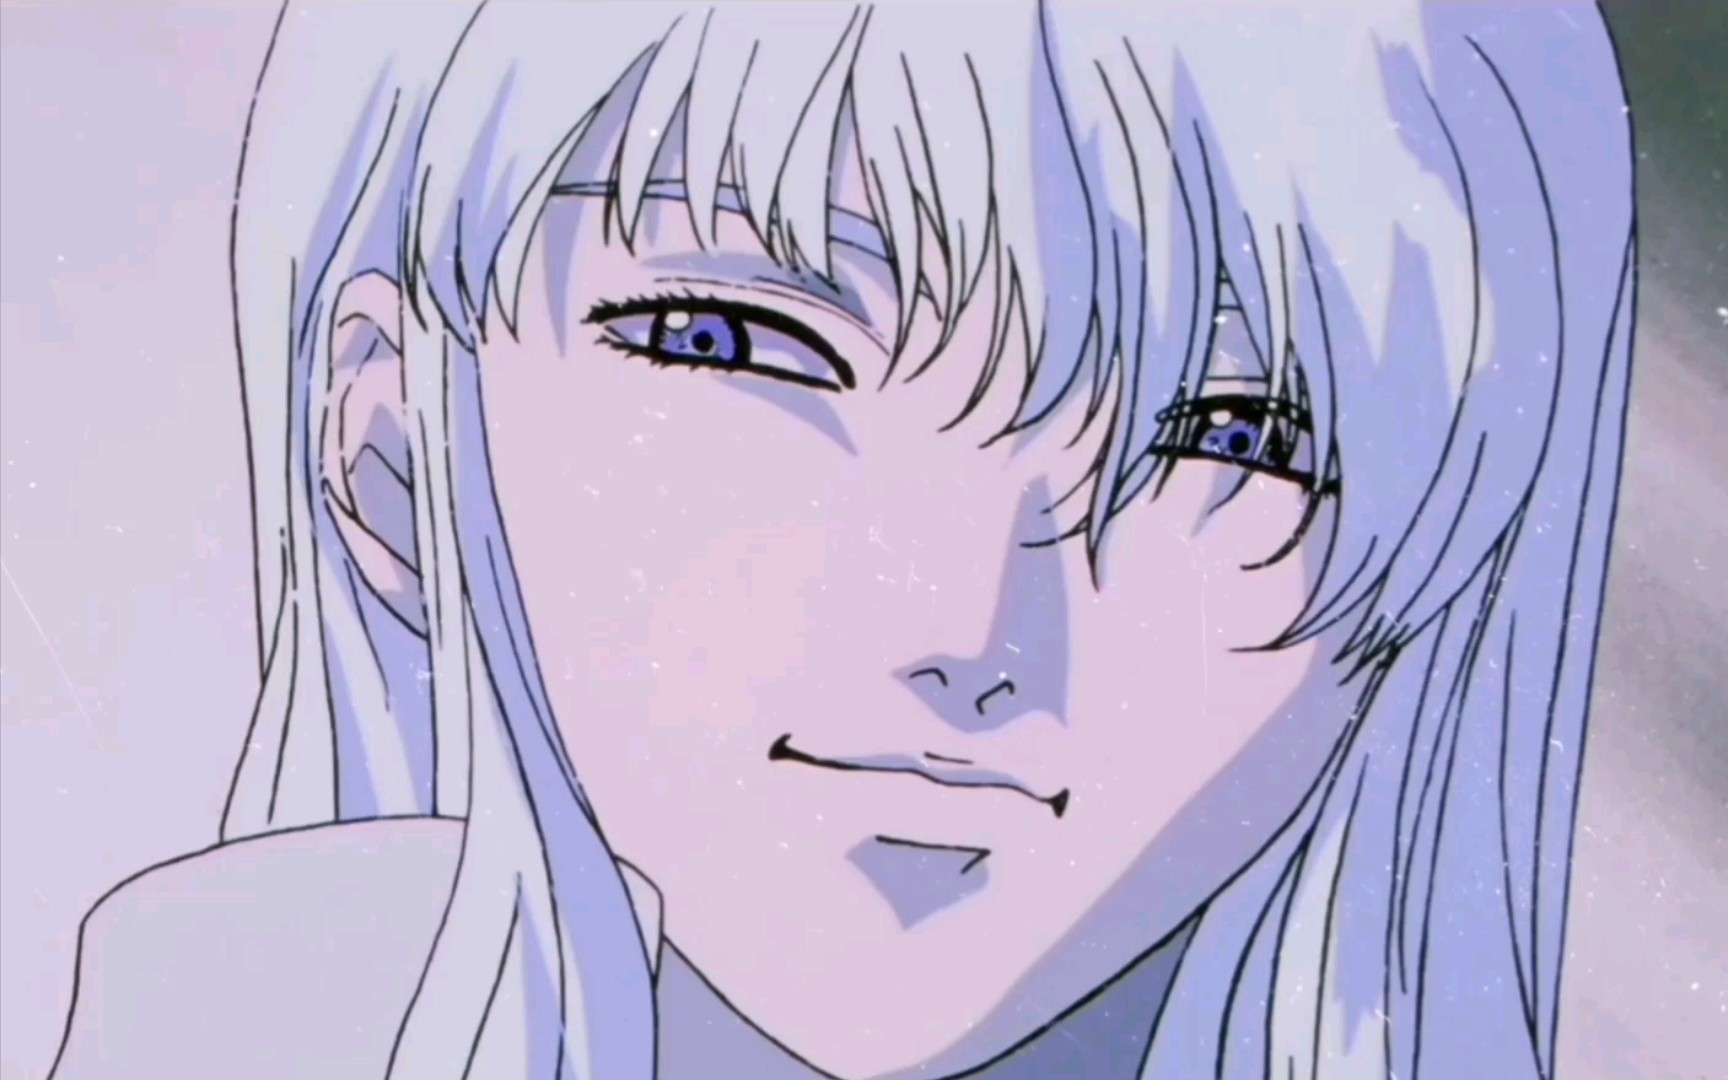 Berserk Manga / Anime Considering cosplaying a fem Golden age Griffith at  the next con I go to. I didn't know if I'd be a good fit but I think would  be